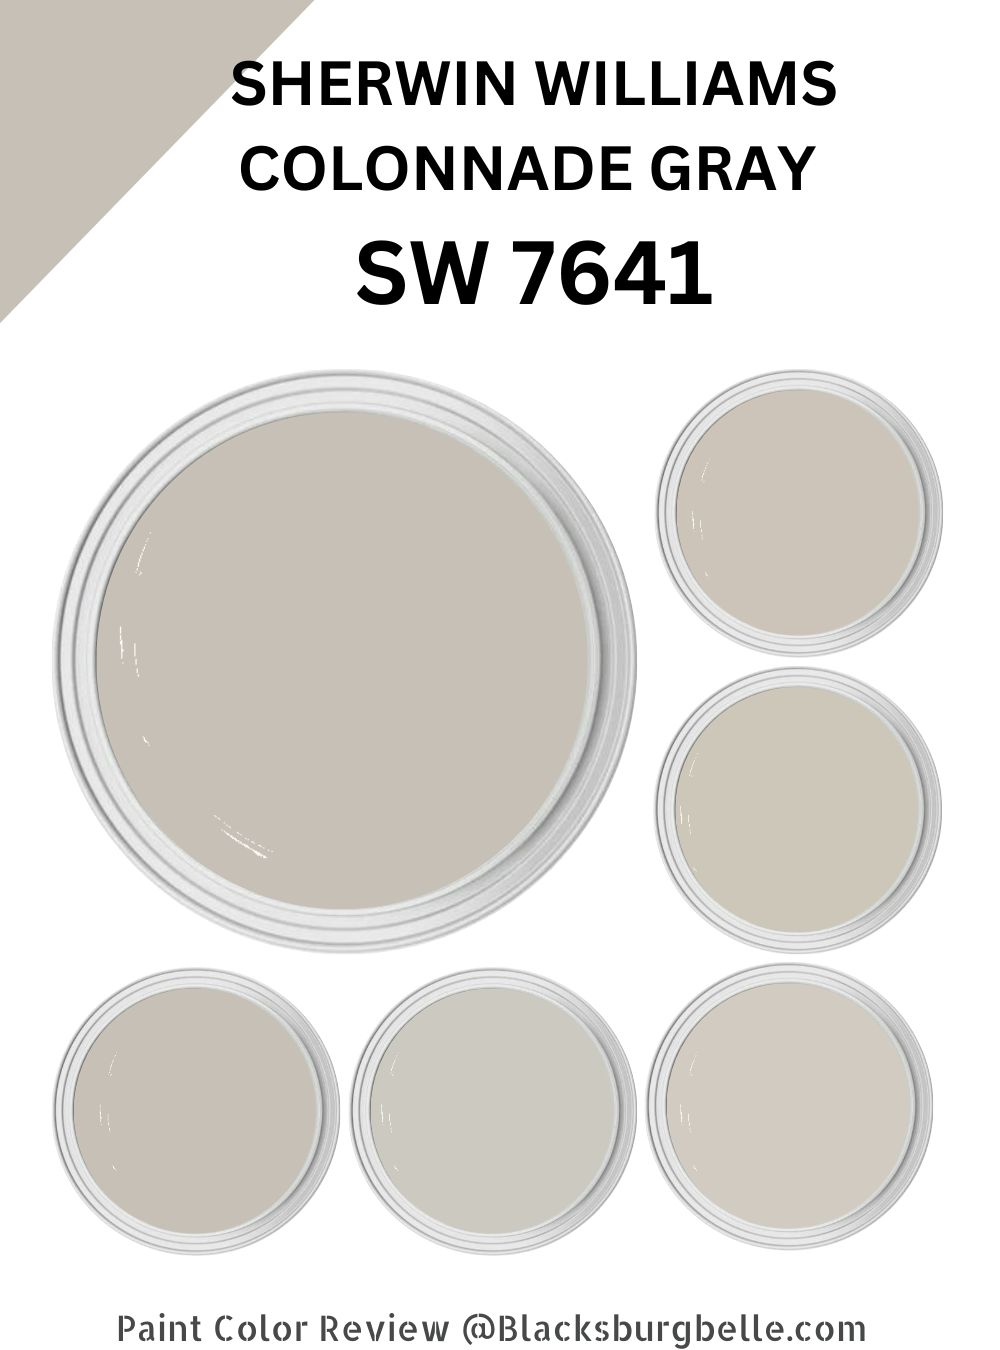 Sherwin Williams Colonnade Gray (SW 7641) Paint Color Review & Pics